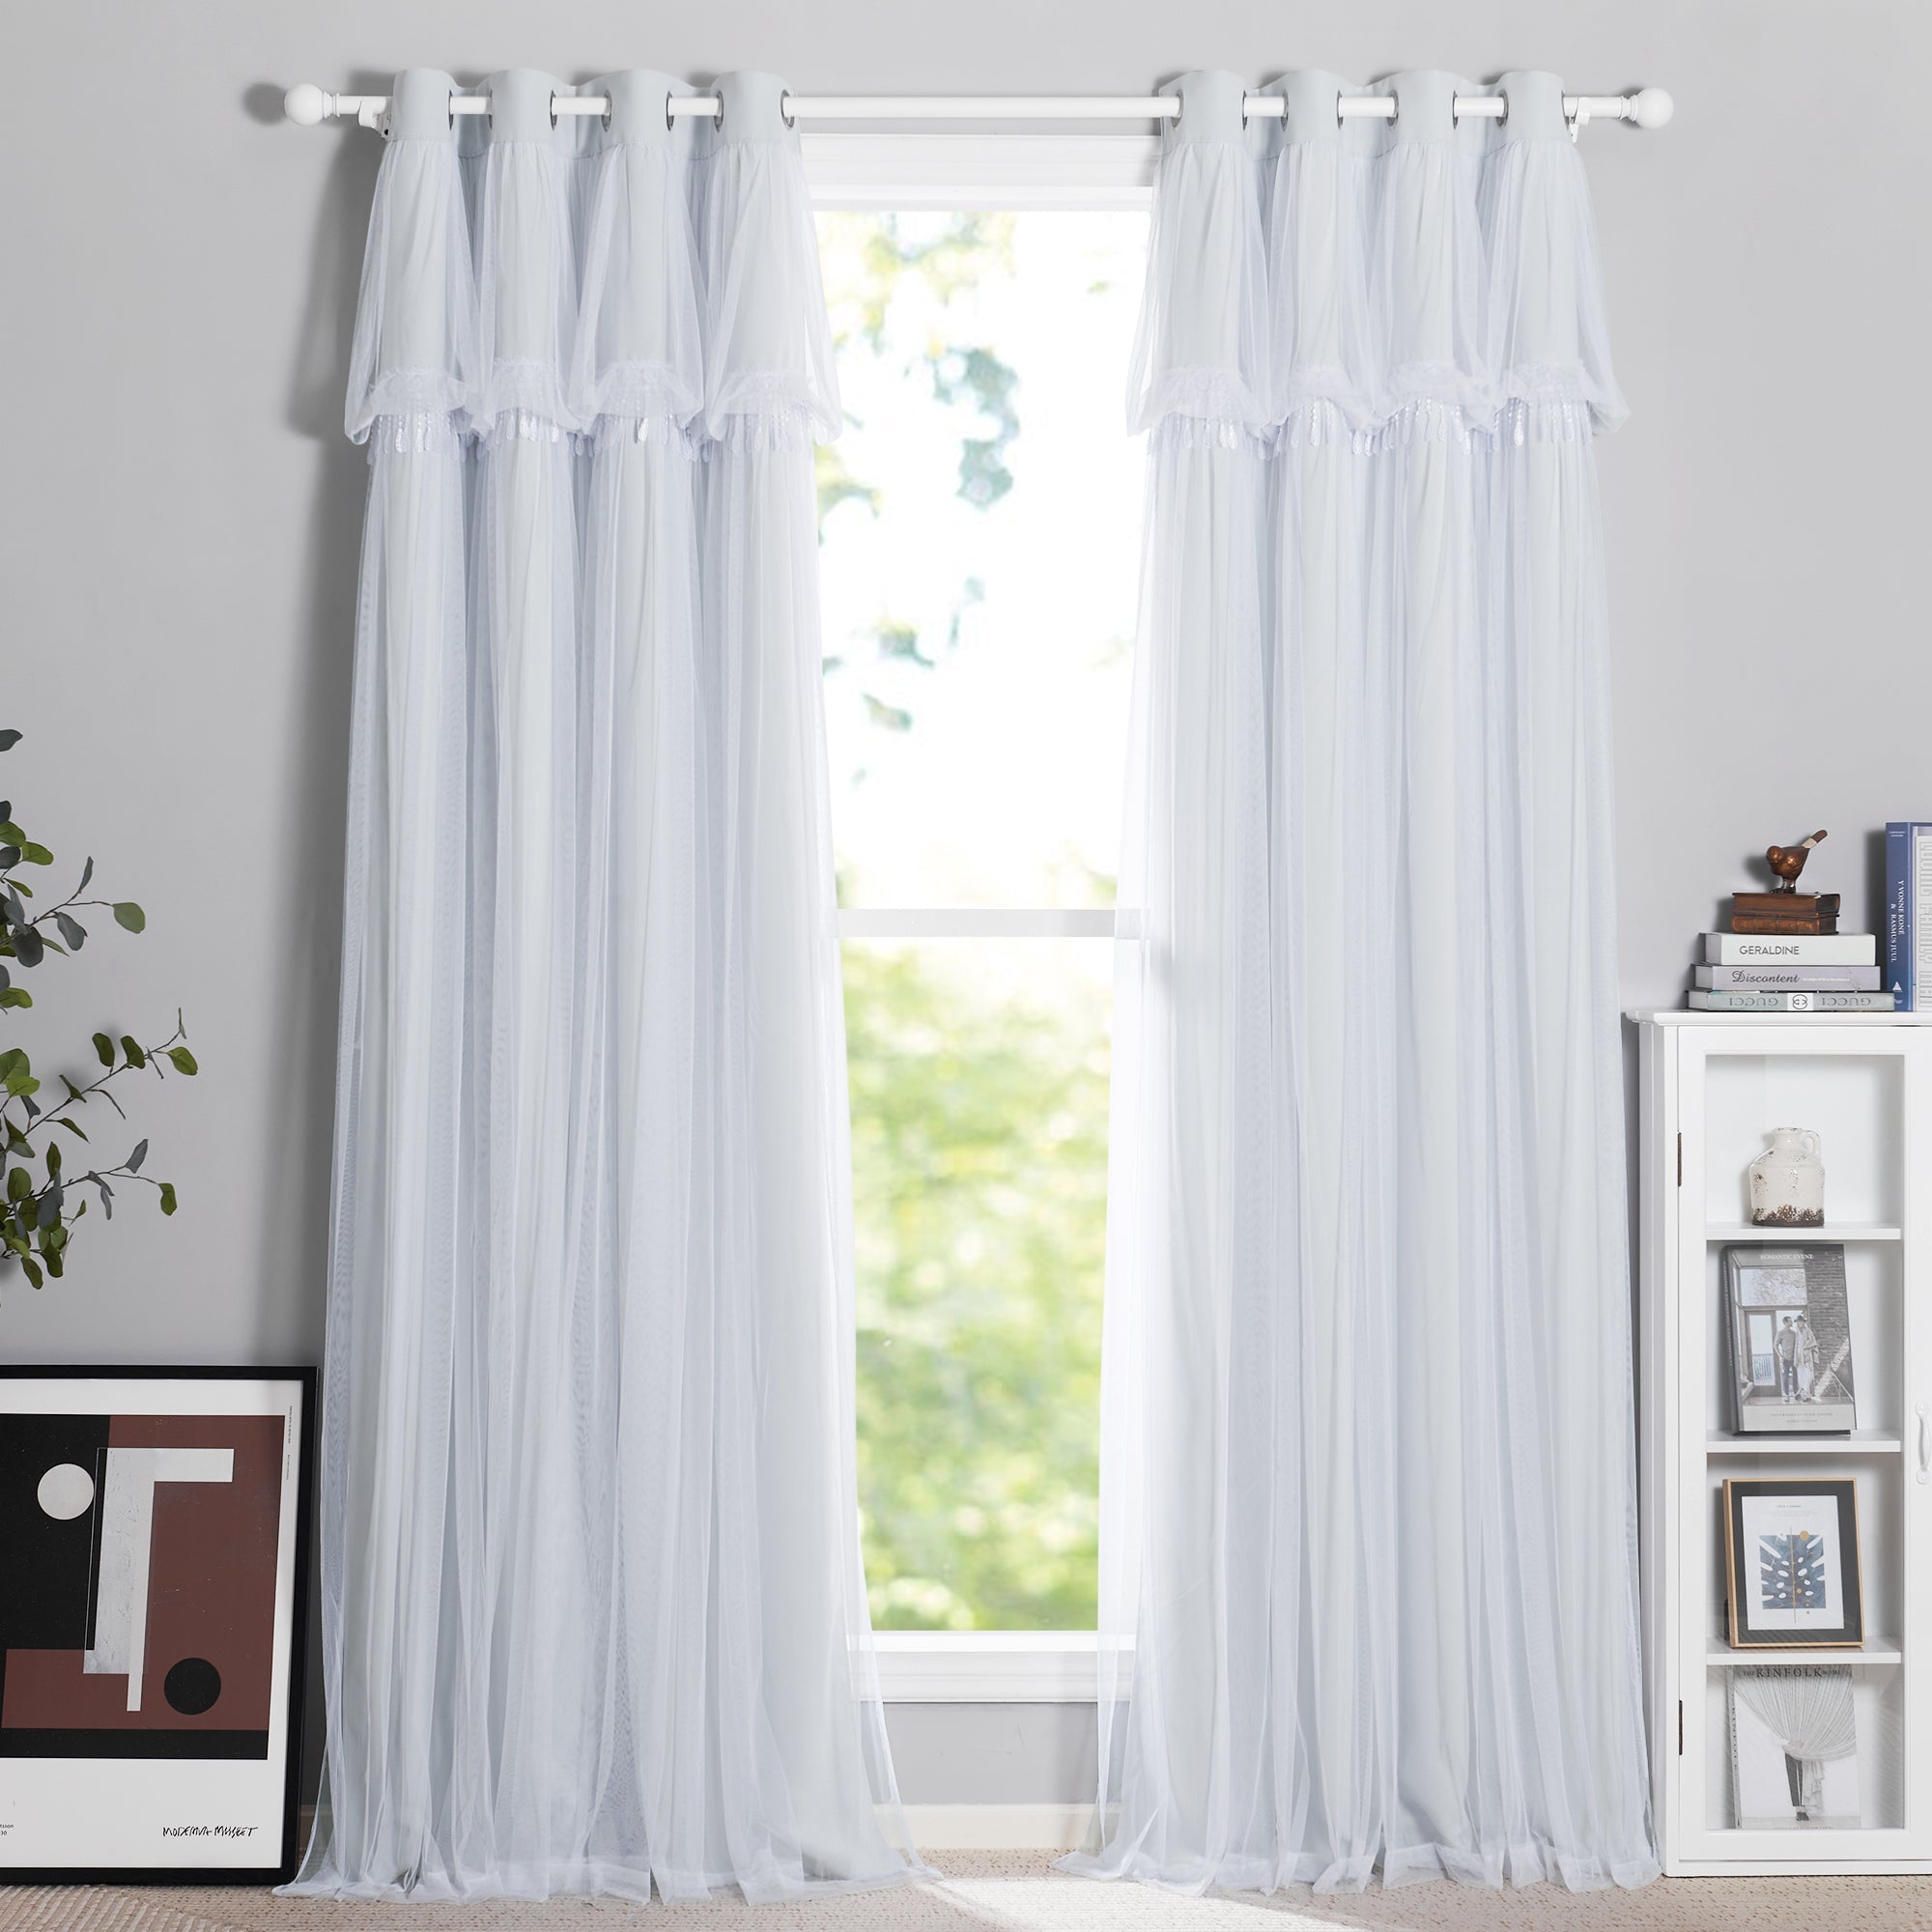 Blackout  Curtain With Sheer Voile Curtain Overlay  2 Panels KGORGE Store